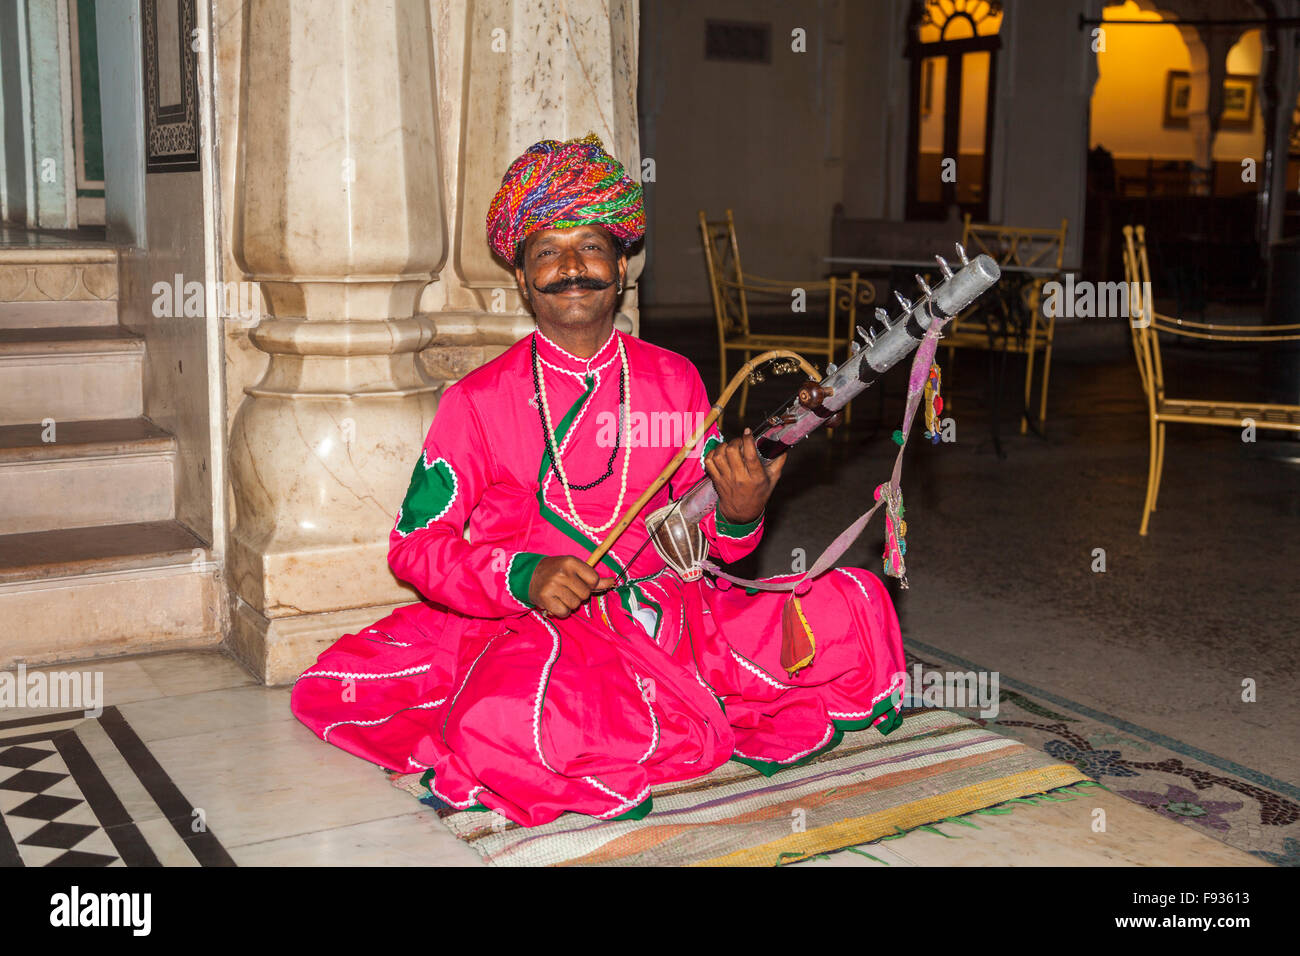 Local musician with large mustache dressed in colourful clothing and turban entertaining in a hotel in Jaipur, Rajasthan, India Stock Photo